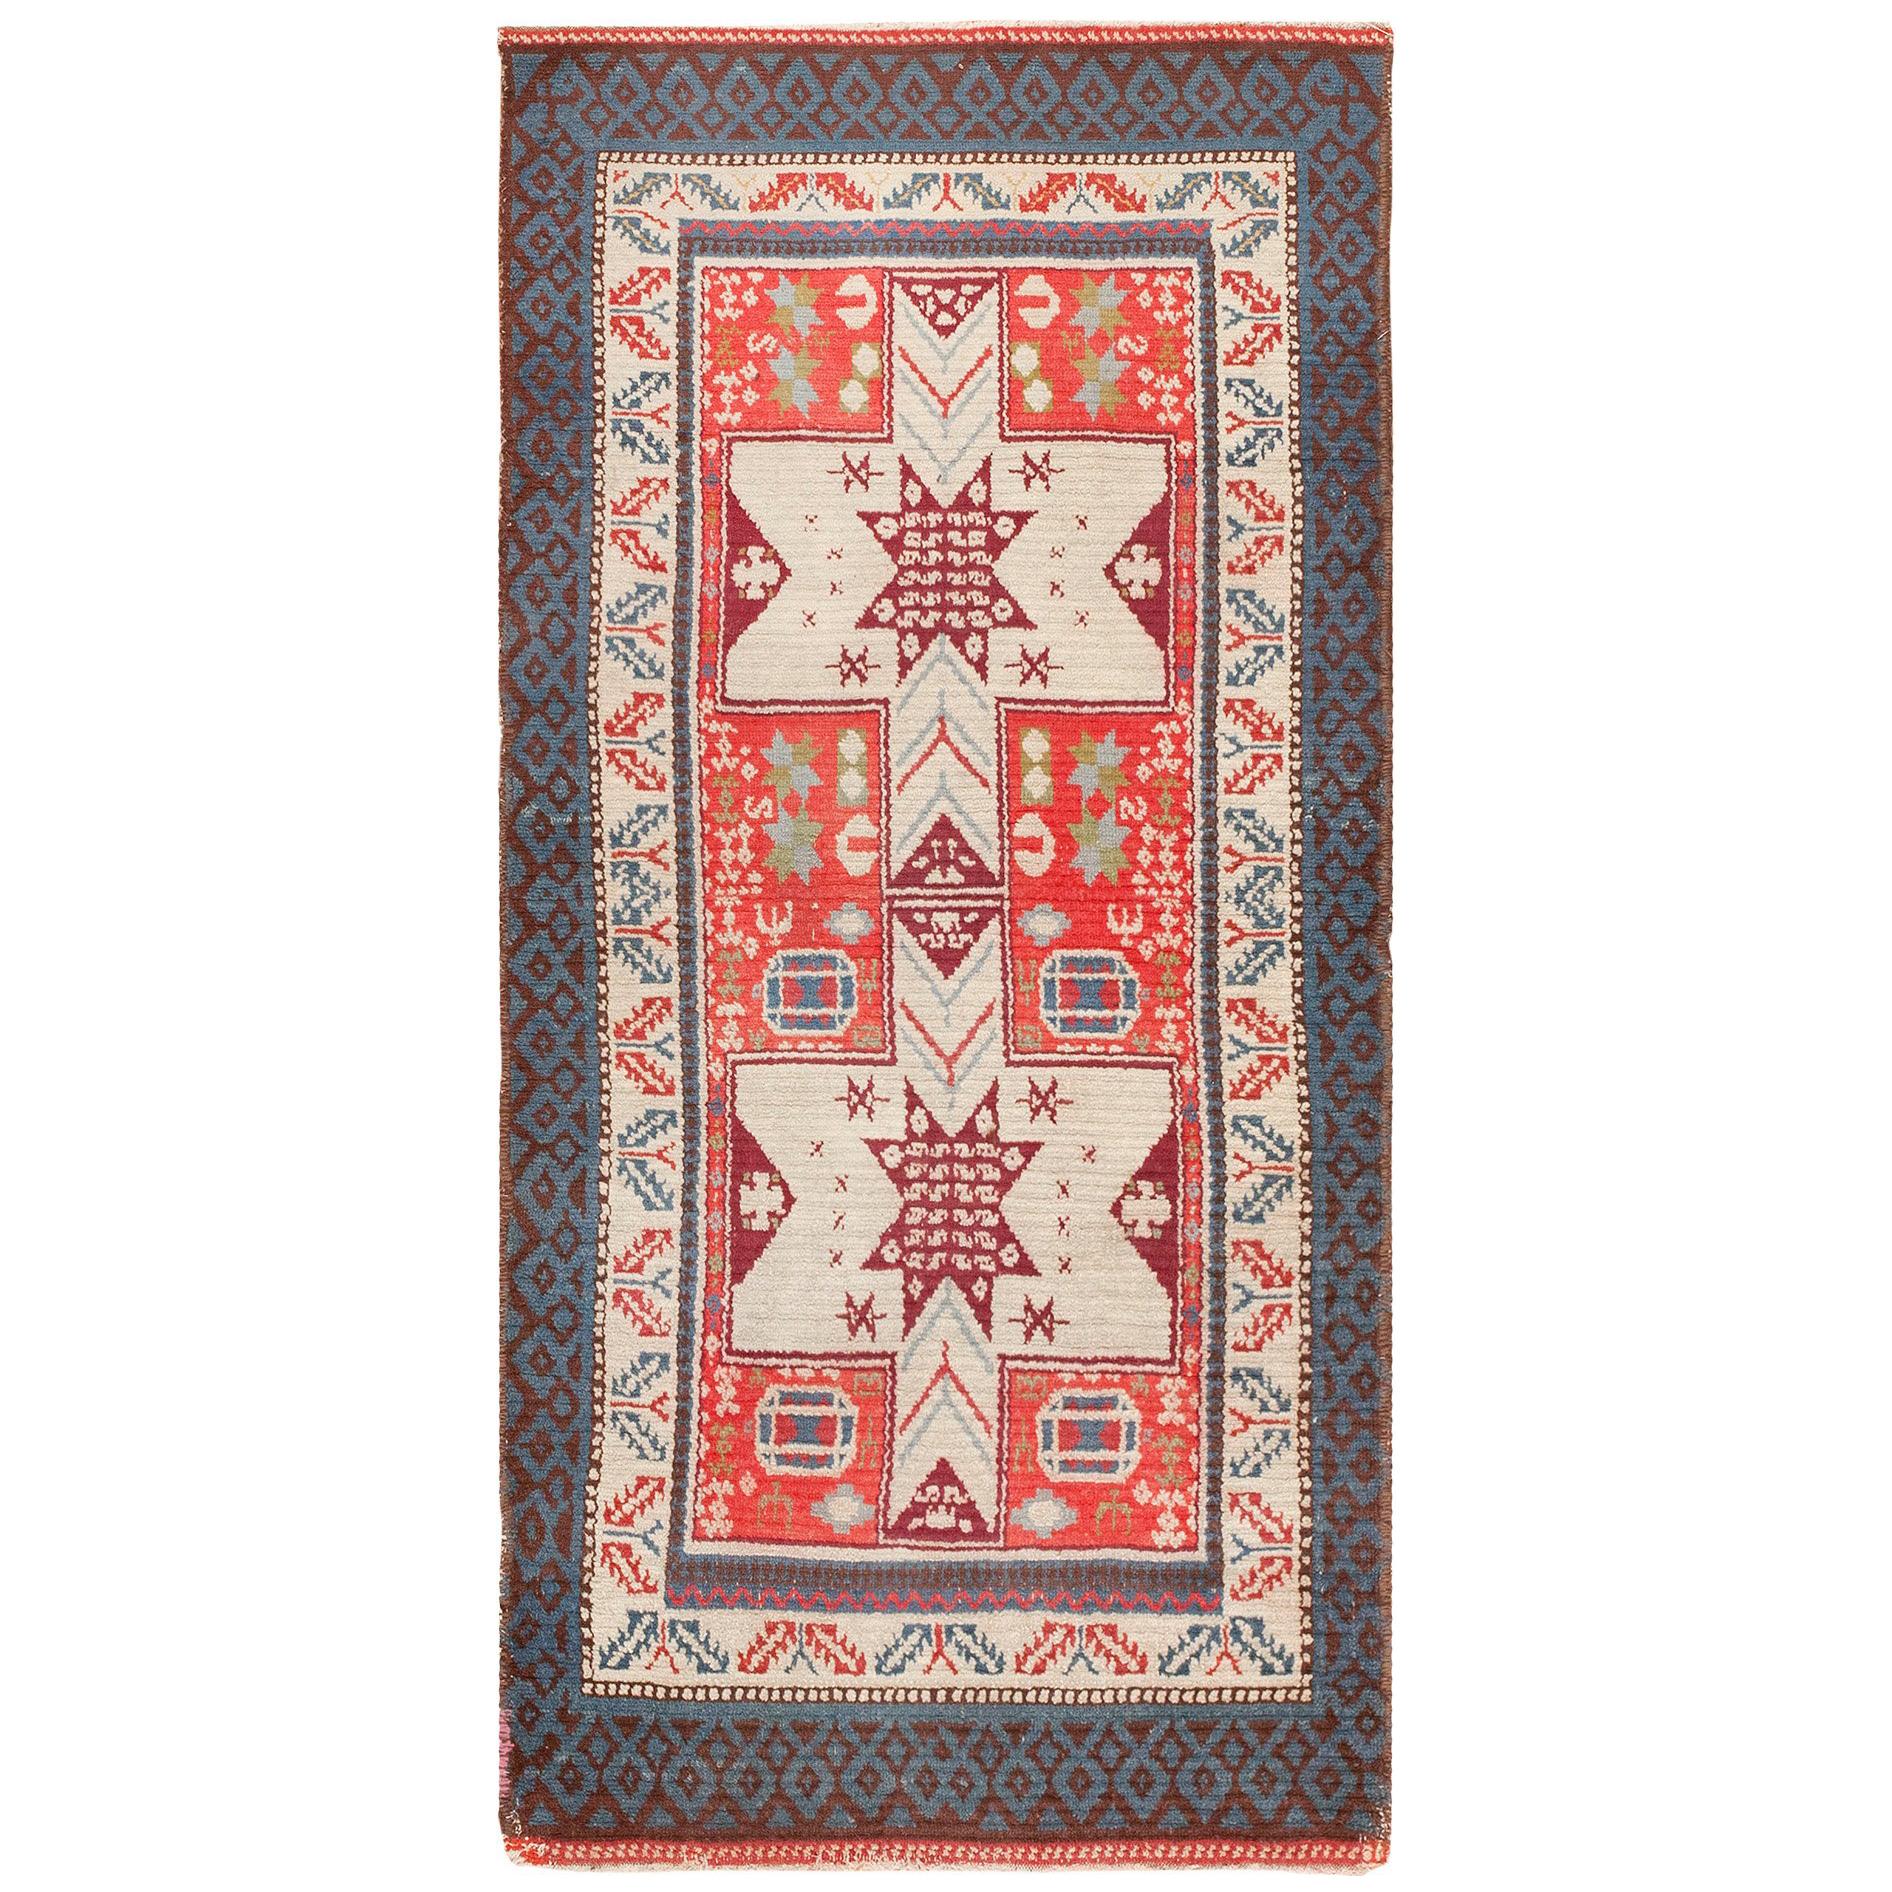 Small Size Antique Spanish Rug. Size: 3 ft x 5 ft 10 in (0.91 m x 1.78 m)